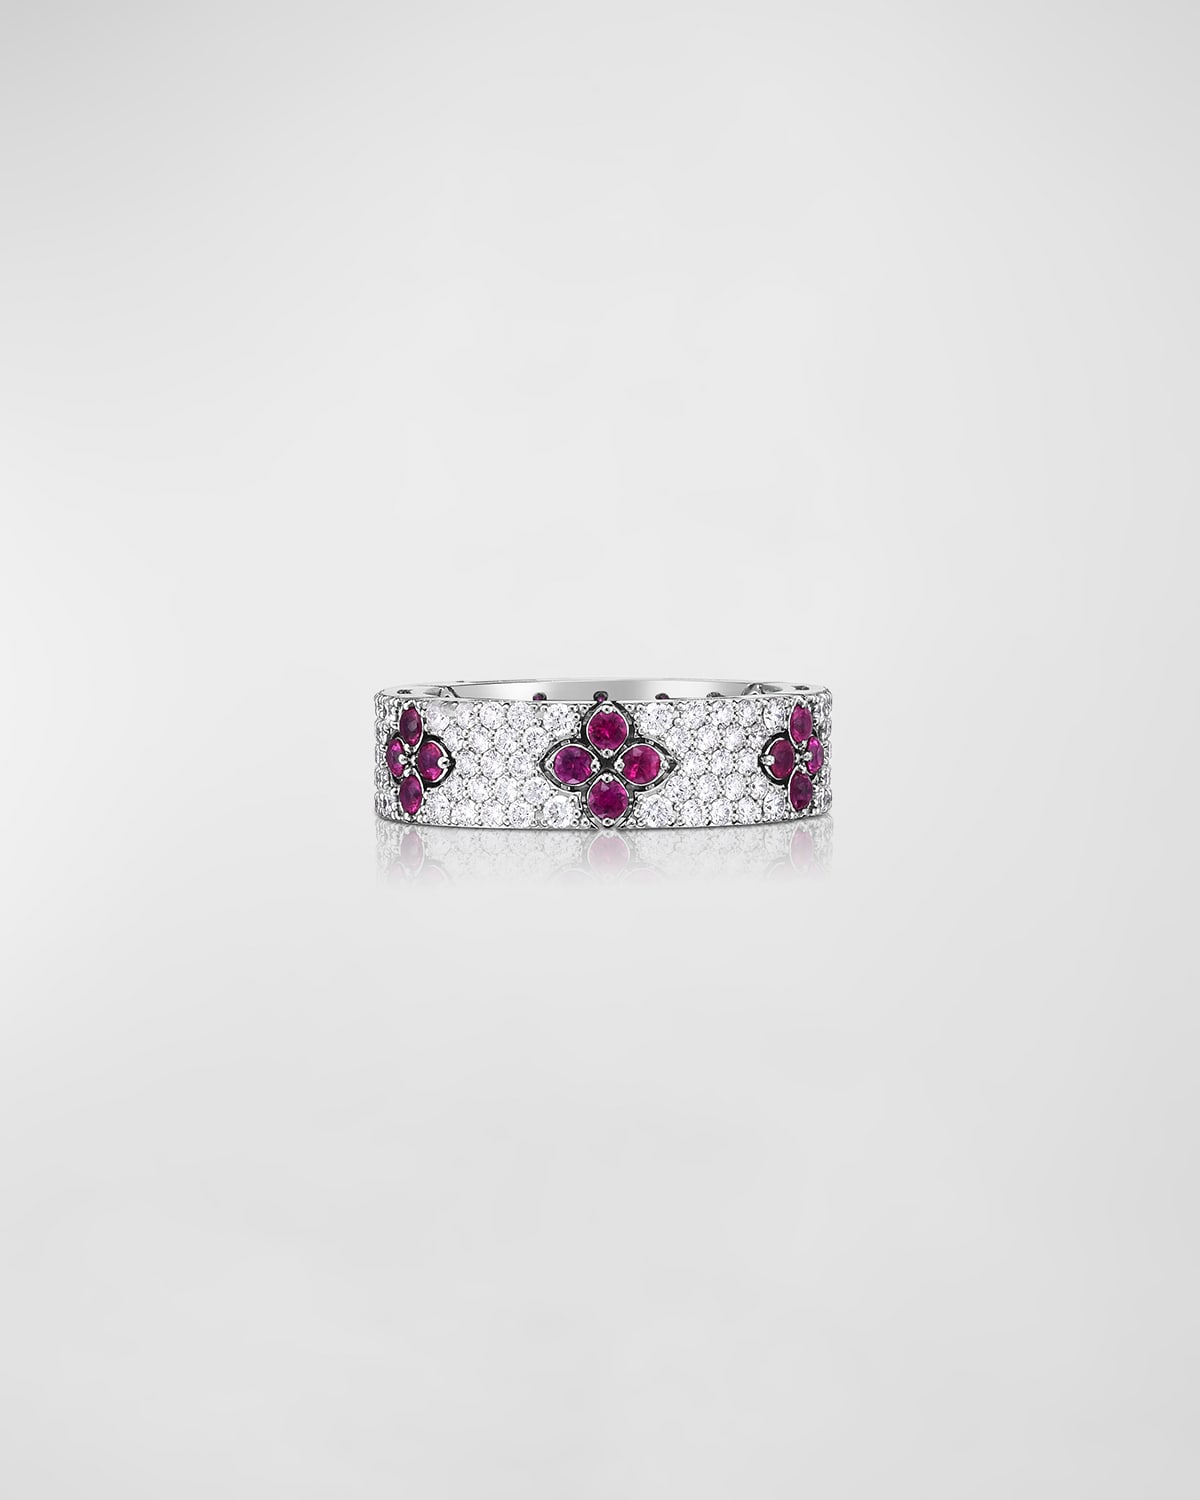 Love in Verona 18k White Gold Diamond and Ruby Ring, Size 6.5